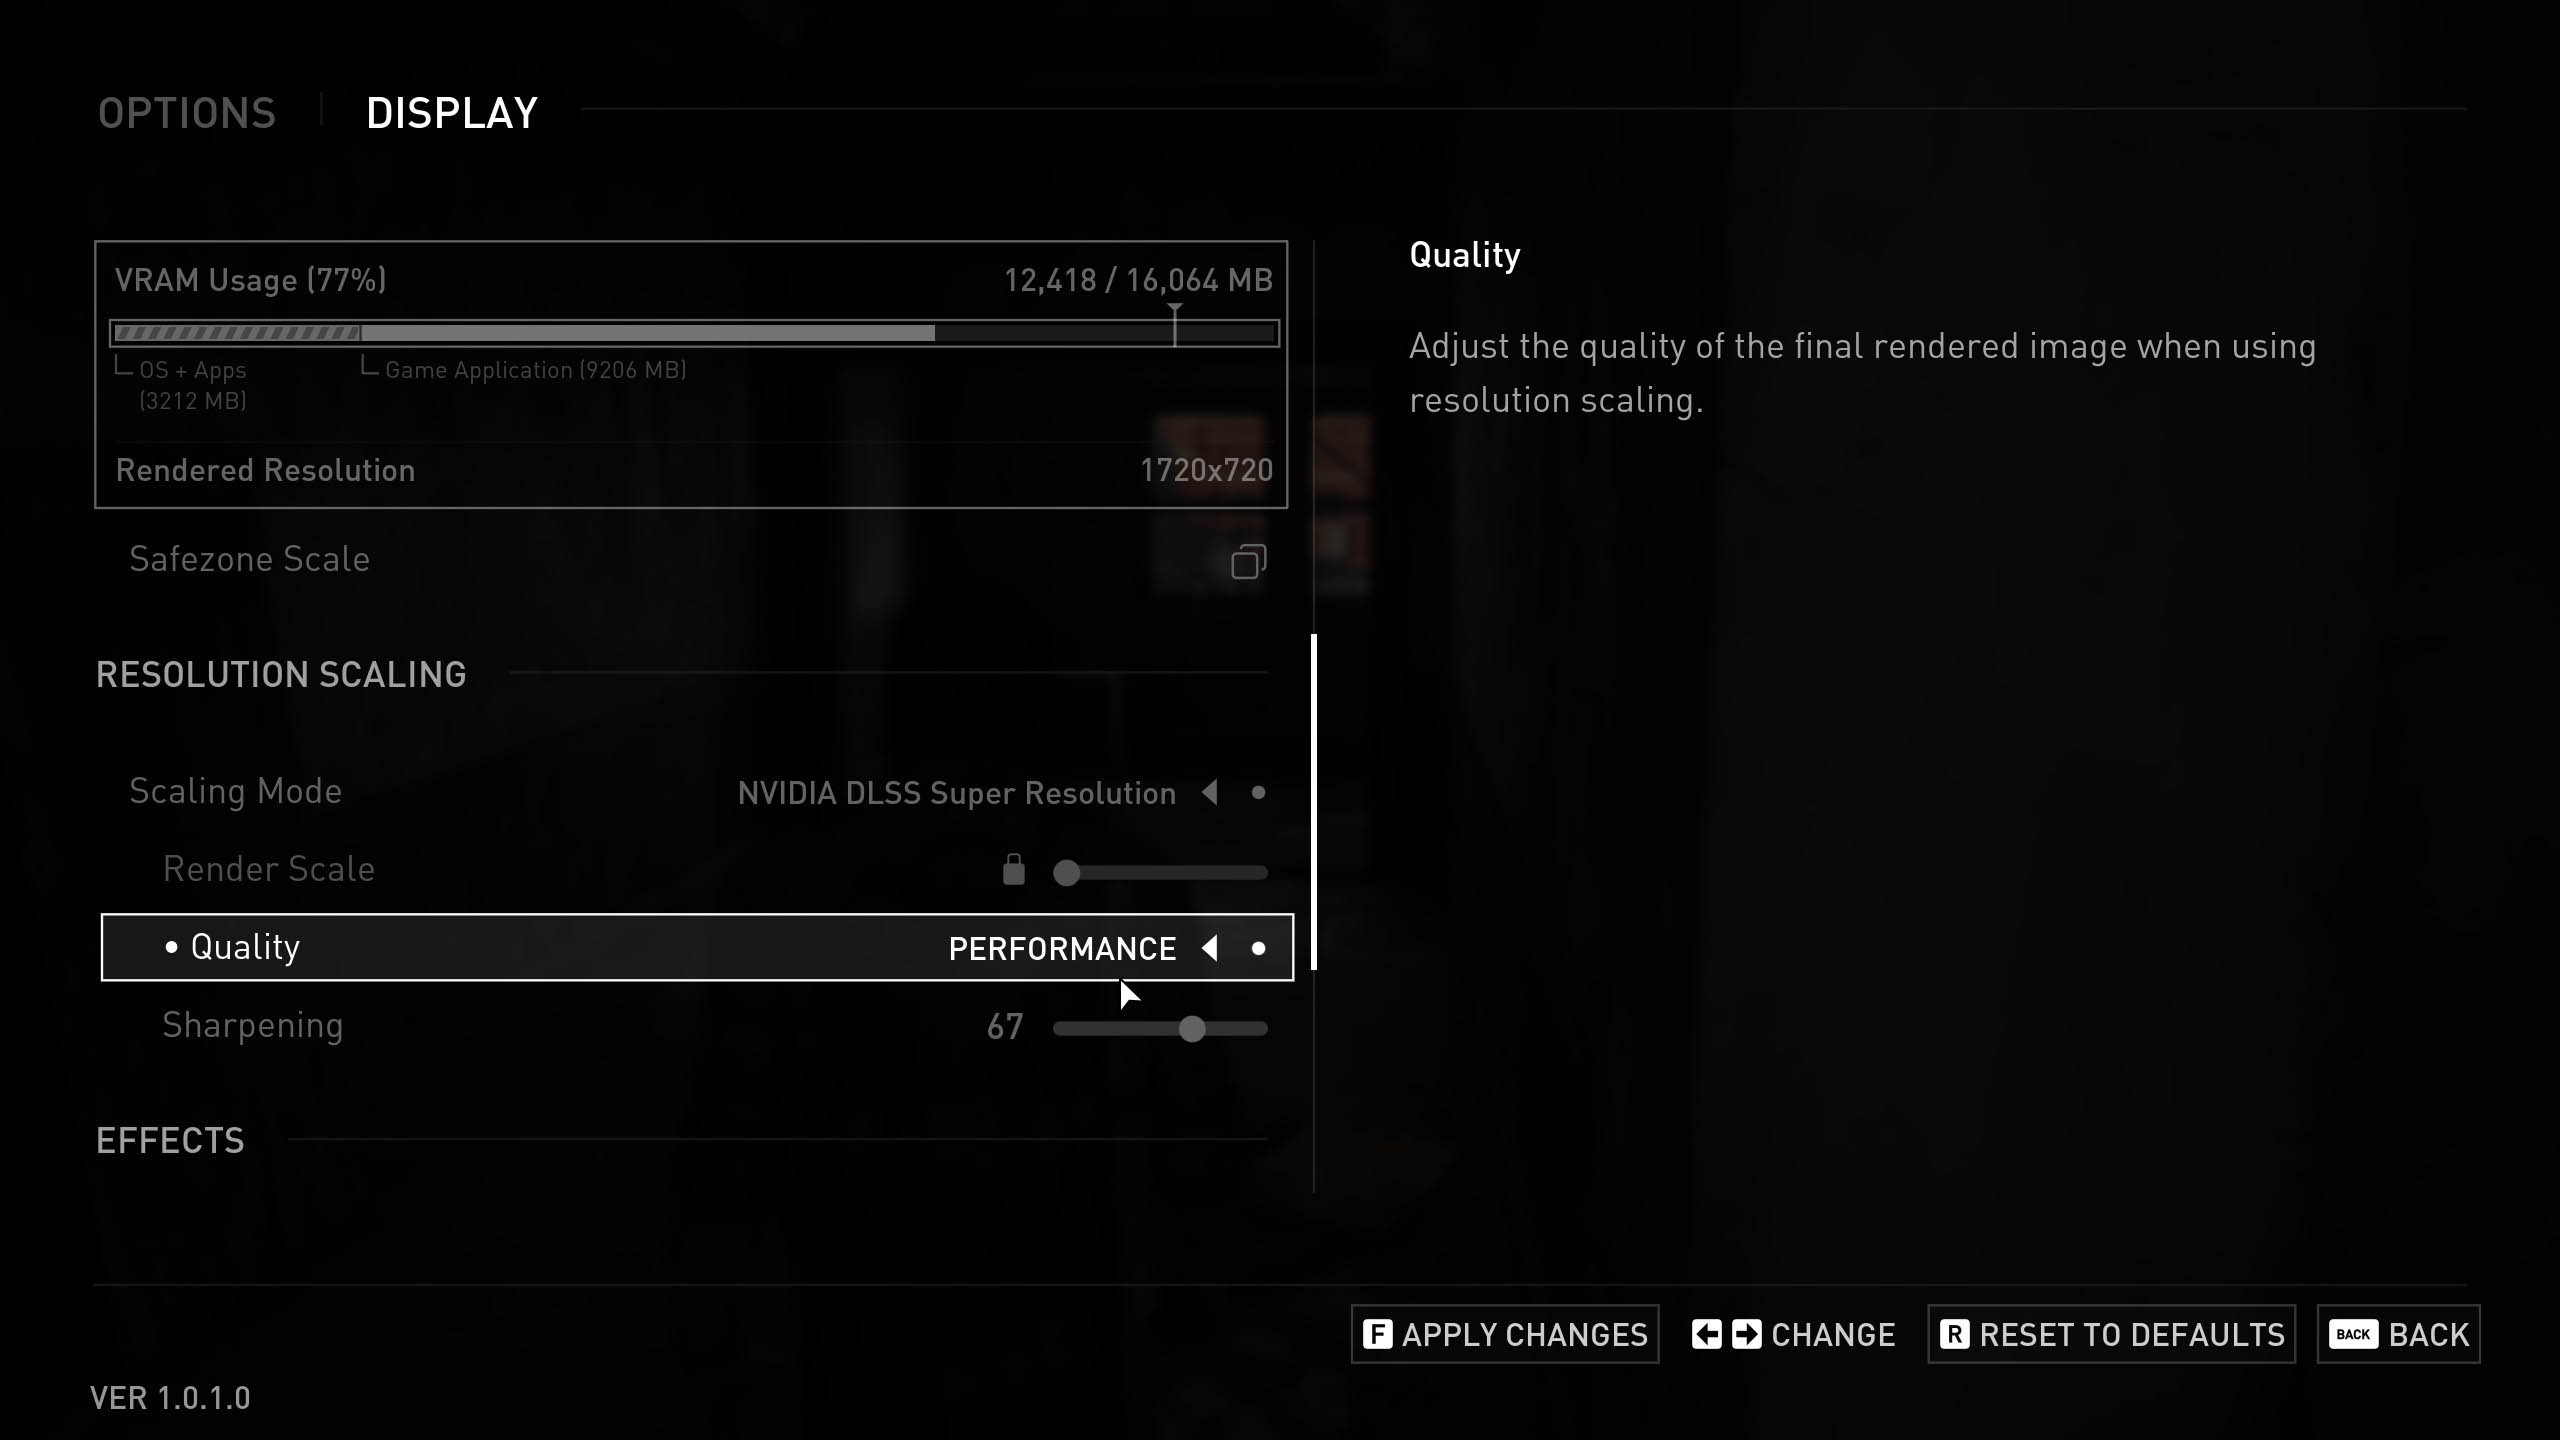 Does The Last of Us Part I suffer from 8GB VRAM crashes on PC?